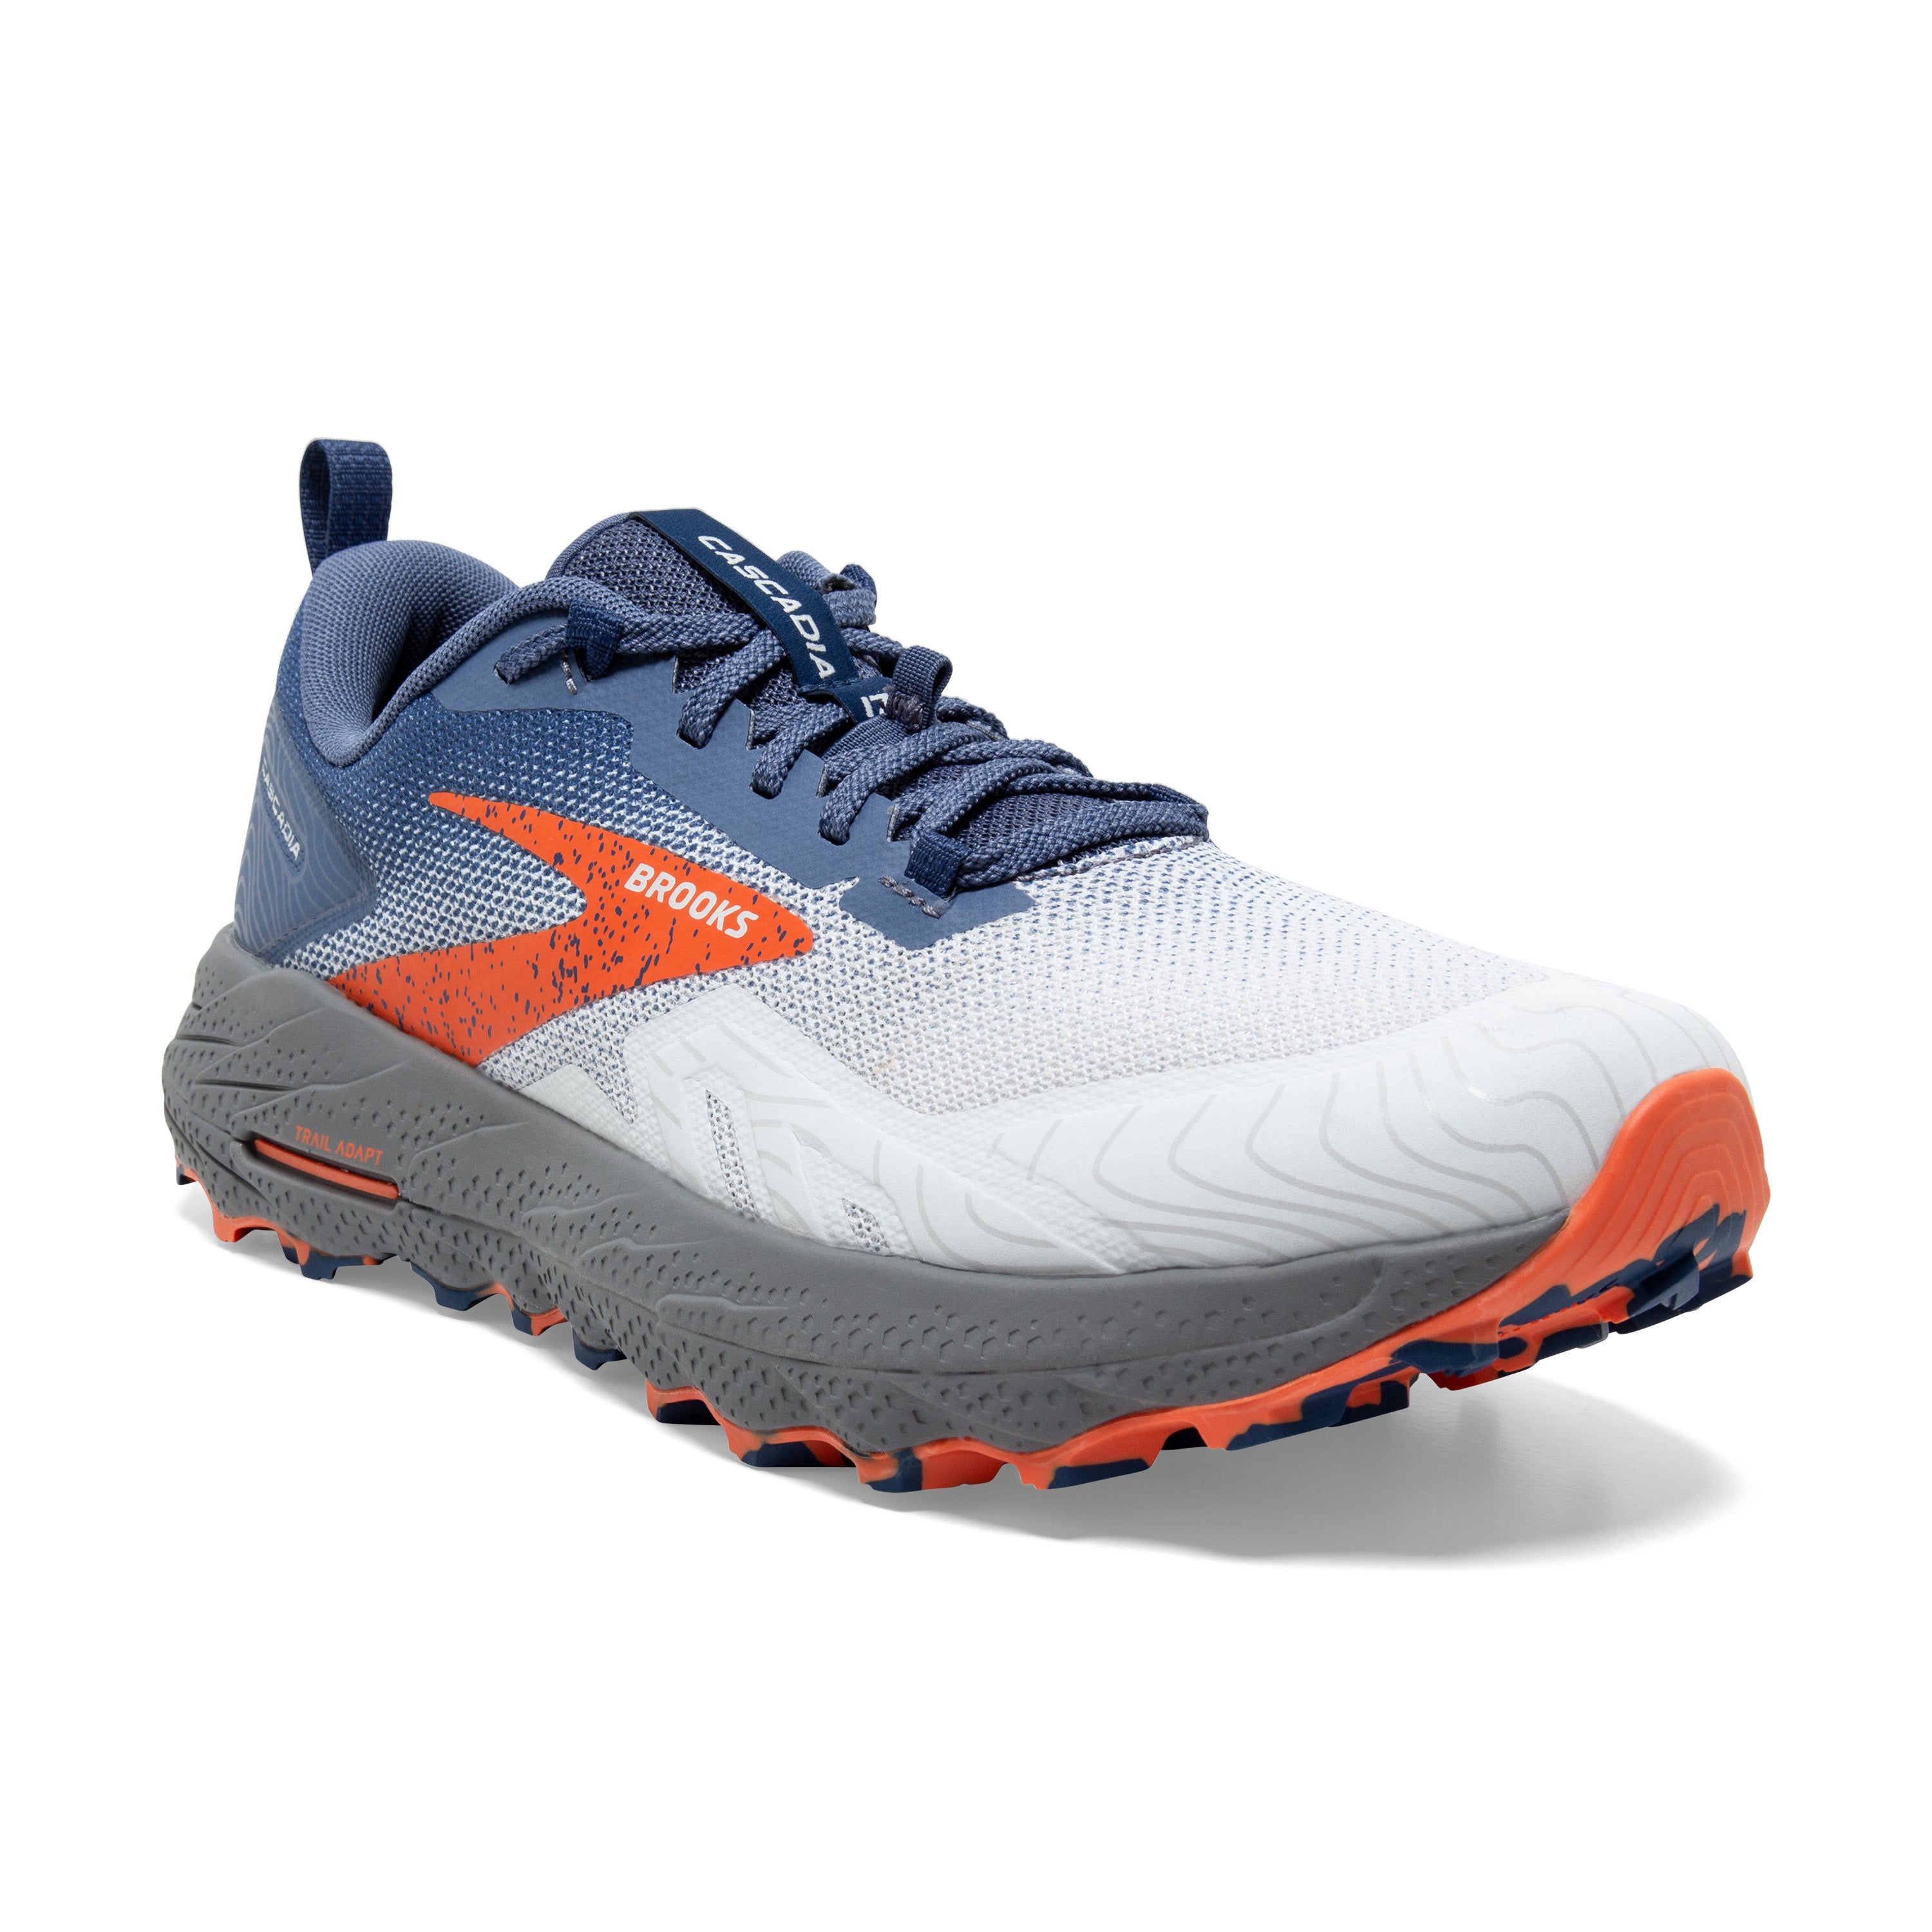 Cascadia 17 - Men's Trail Running Shoes - Wide